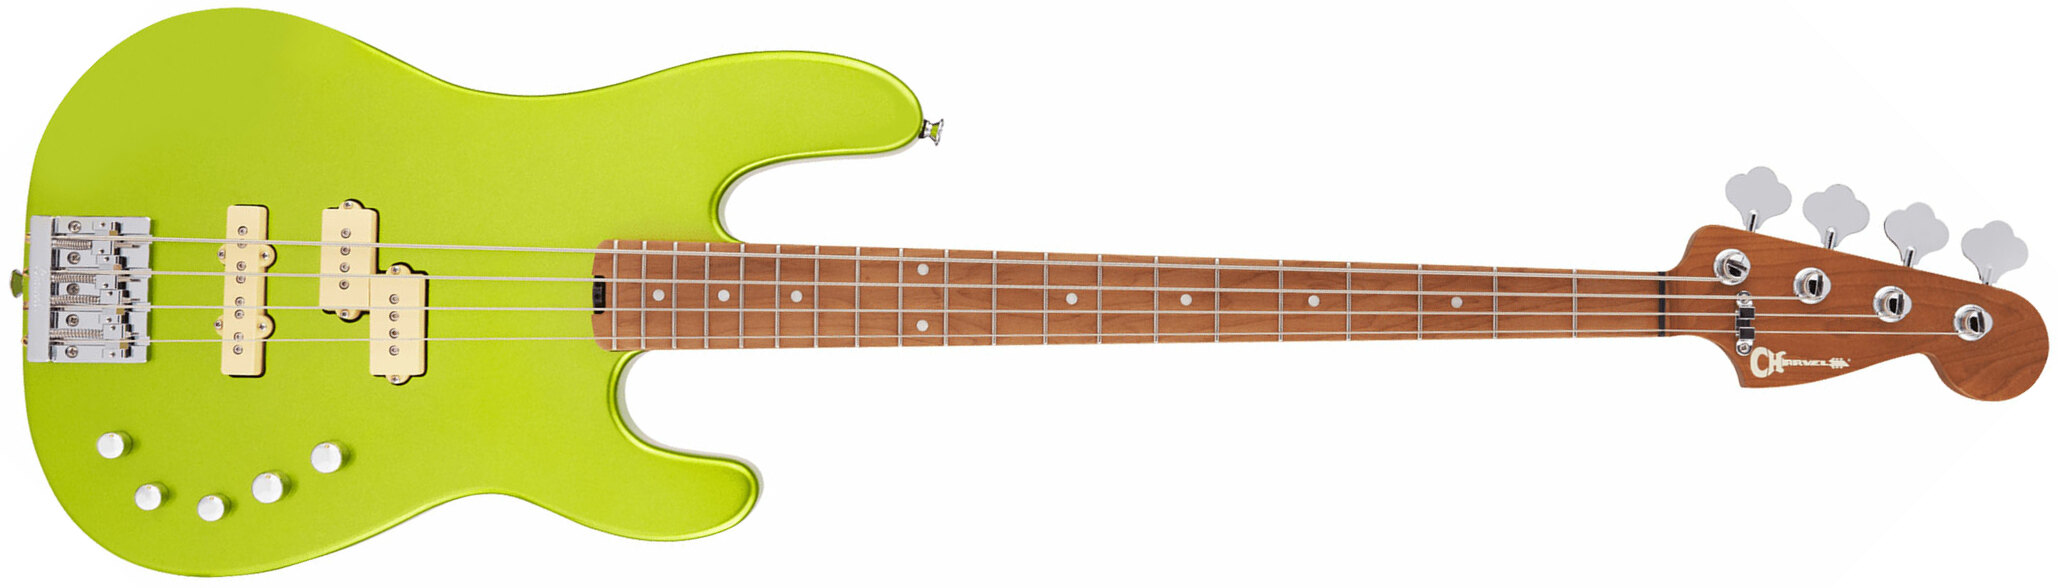 Charvel San Dimas Bass Pj Iv Pro-mod Mex 4c Active Mn - Lime Green Metallic - Solid body electric bass - Main picture